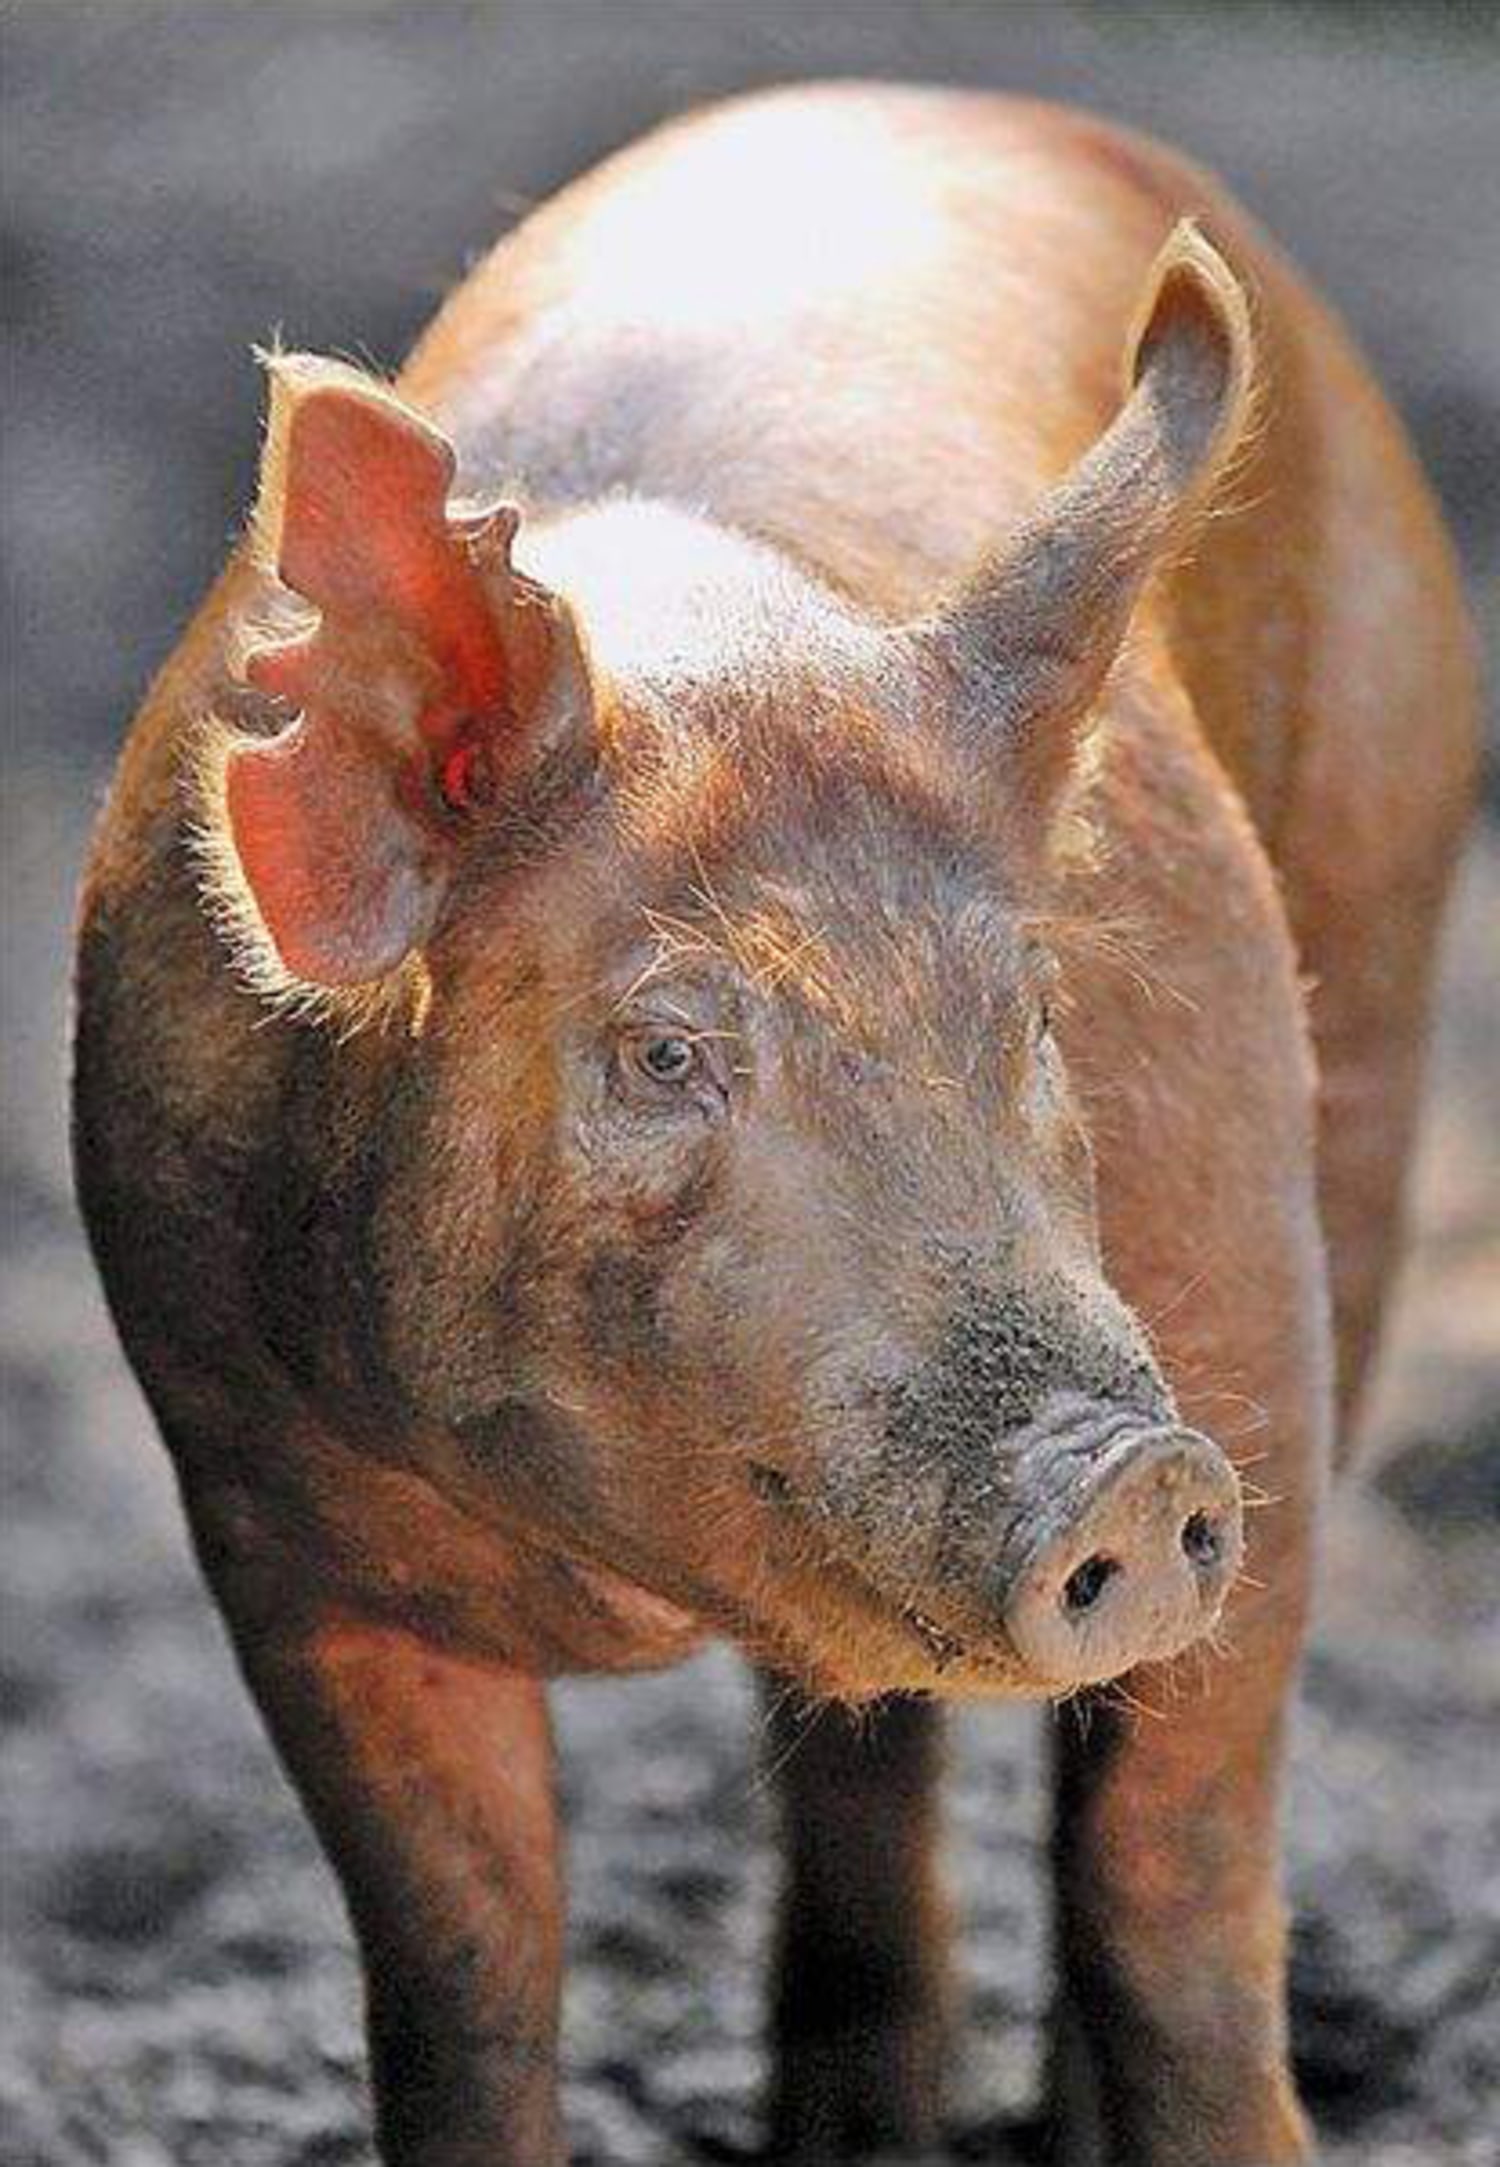 Pig withstands Tasers to escape slaughter